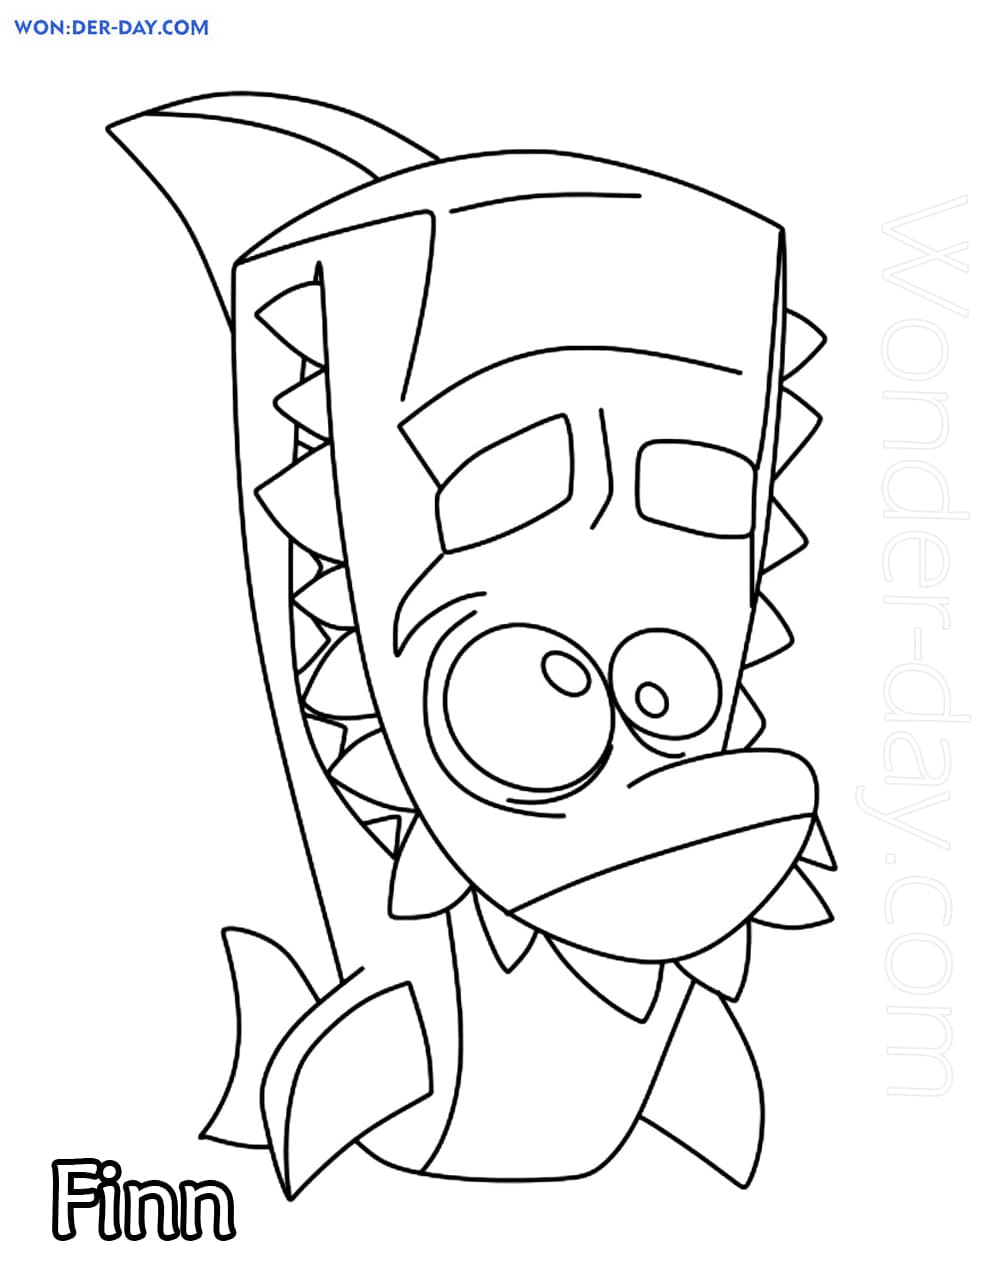 Finn Zooba Coloring Pages